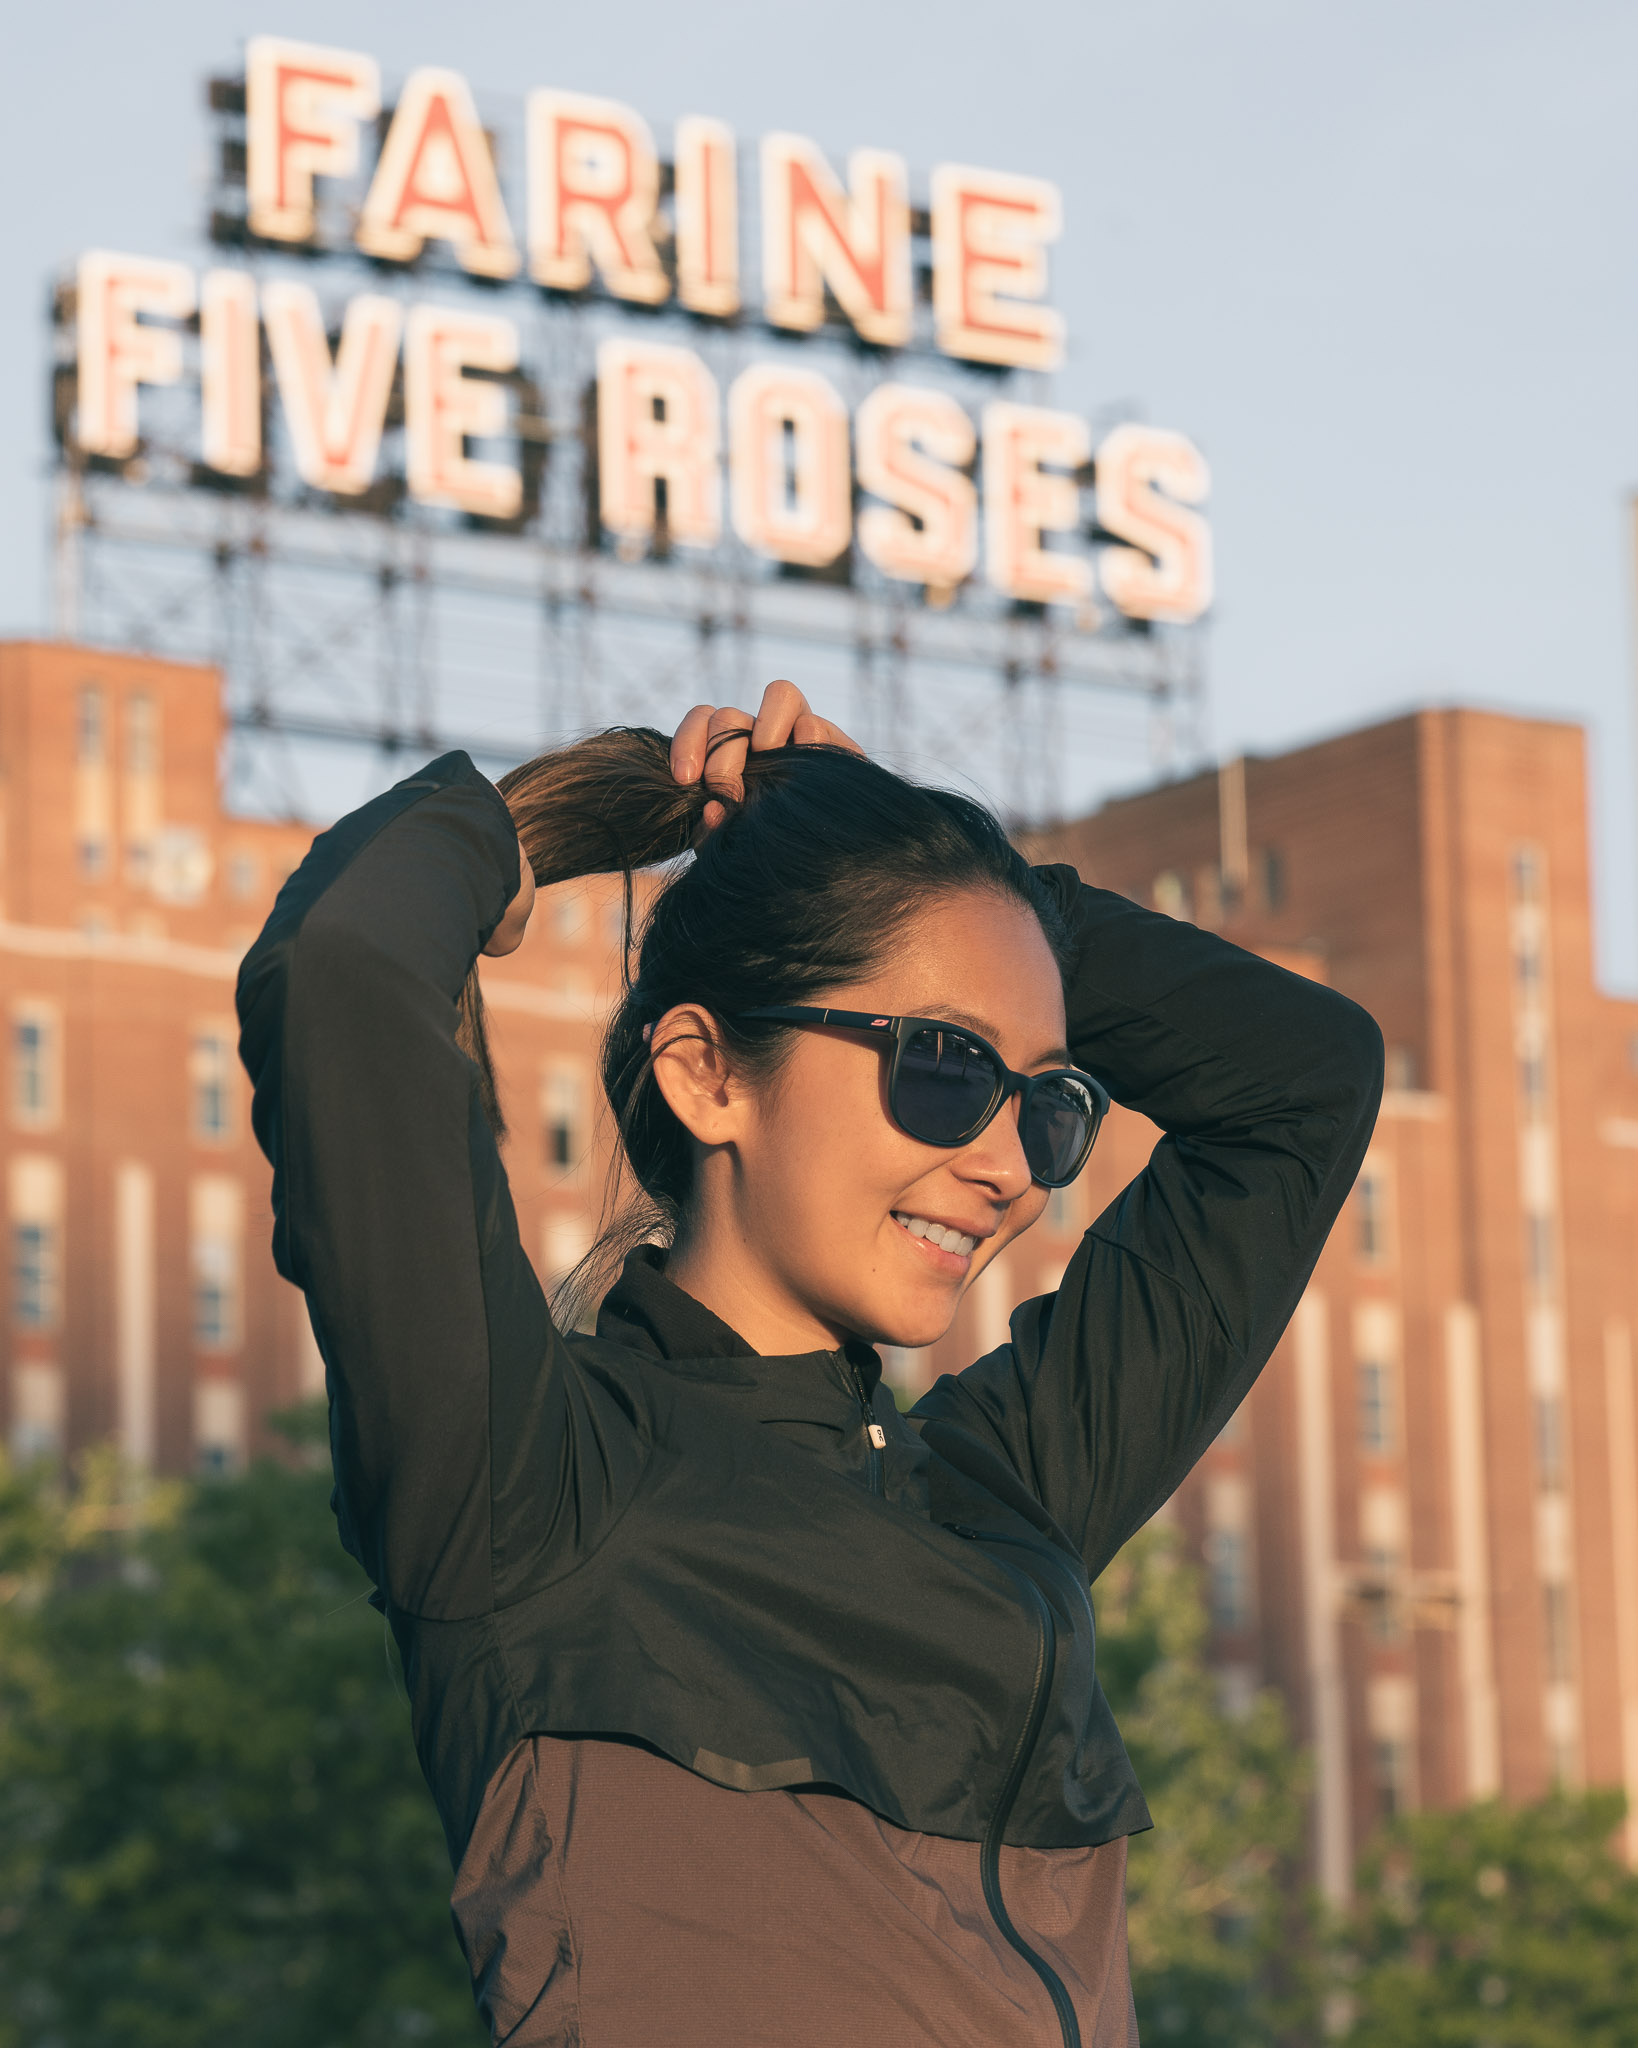 Woman in sportswear replacing her hair in front of the Farine Five Roses factory